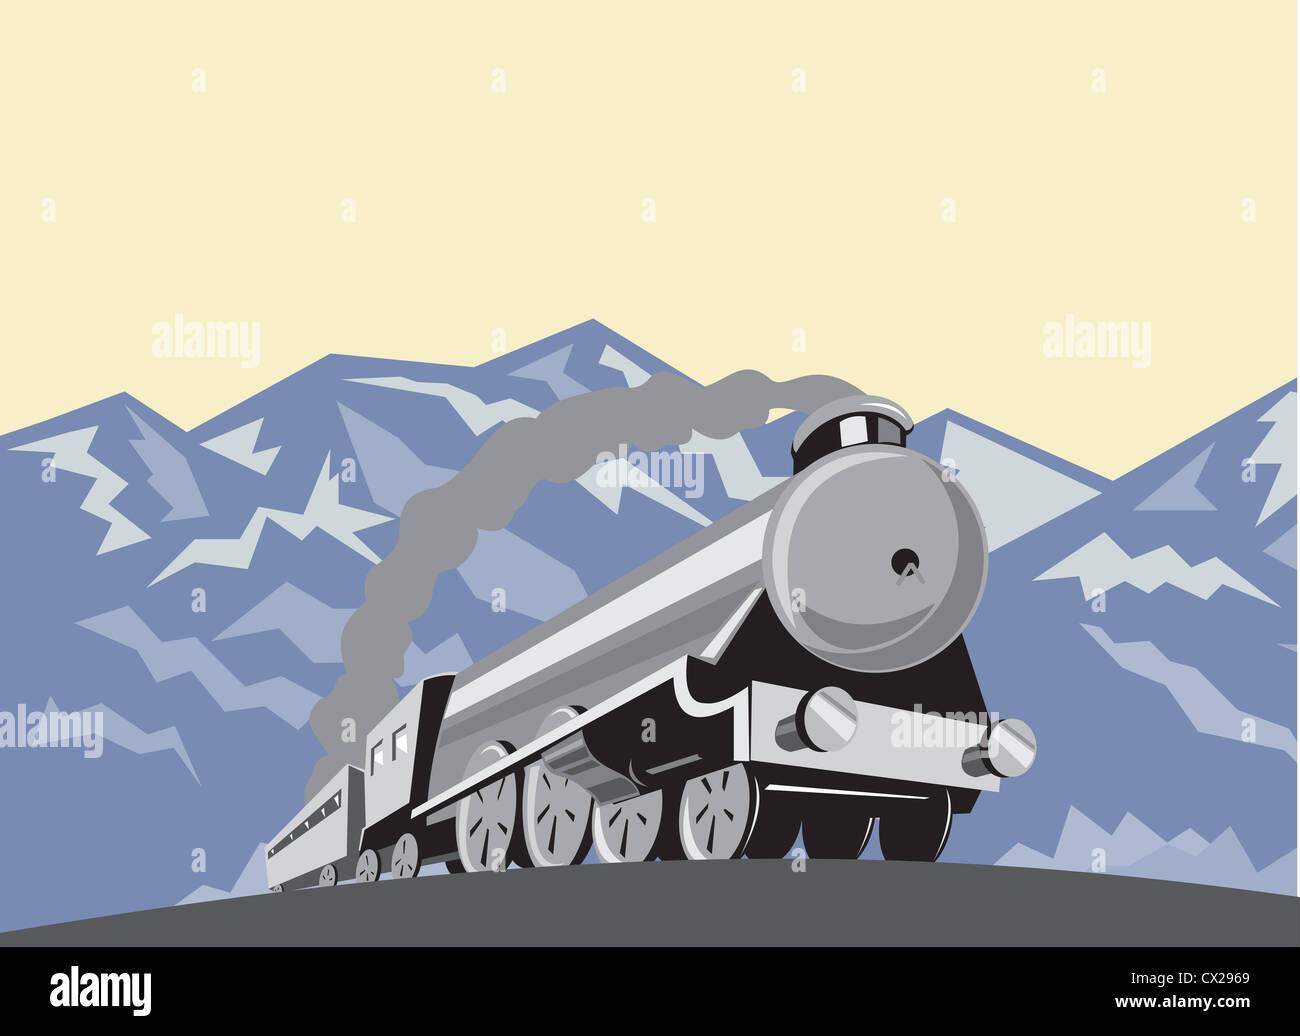 Illustration of a steam train locomotive viewed from a low angle done in retro style with mountains in the background. Stock Photo